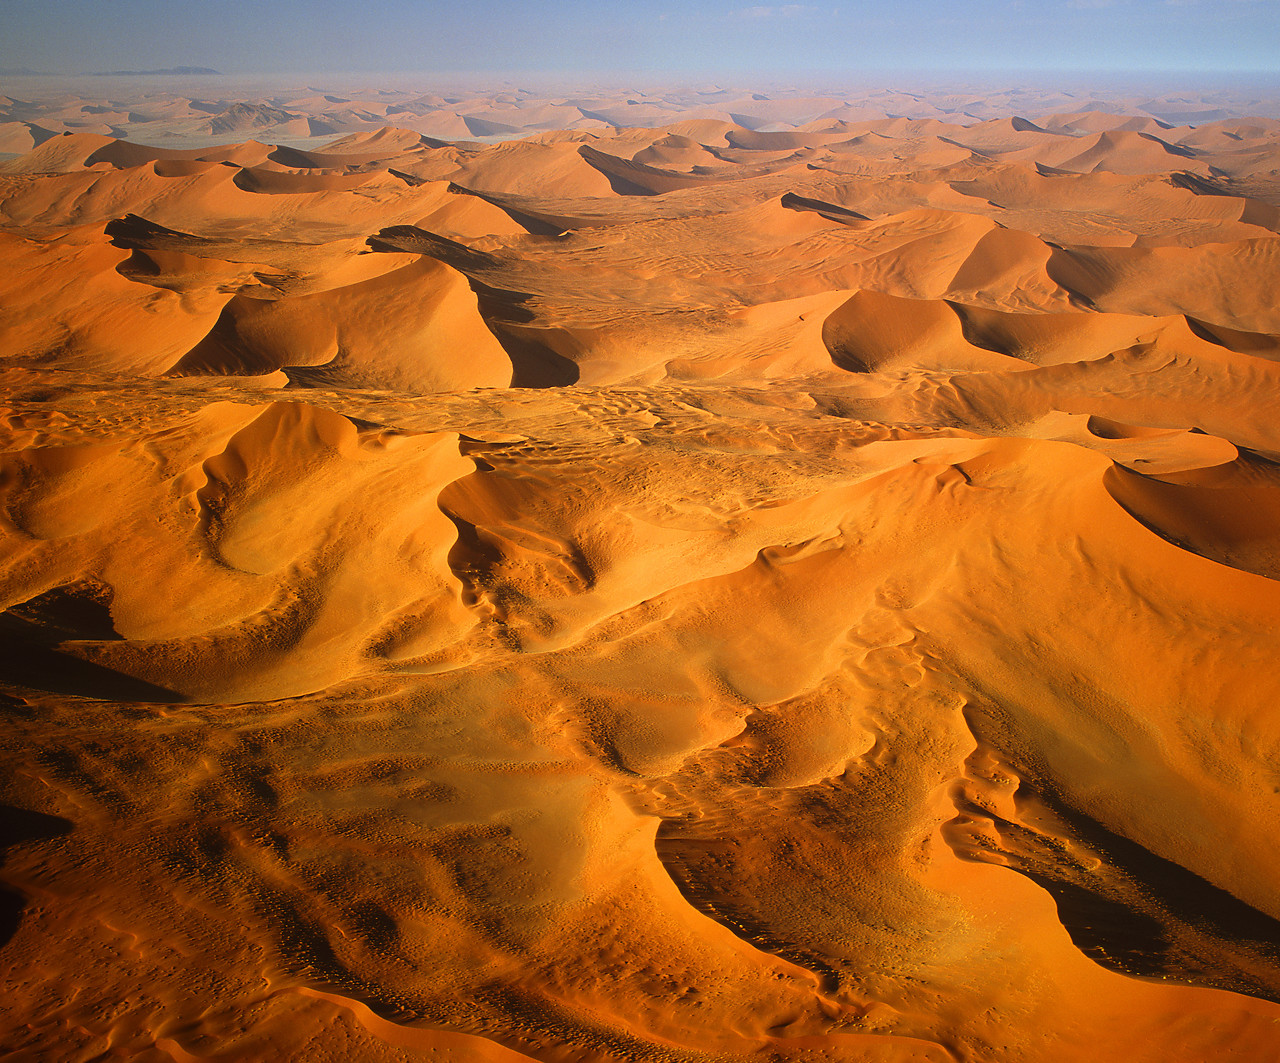 #010838-1 - Aerial View of Sand Dunes, Sossusvlei, Namibia, Africa